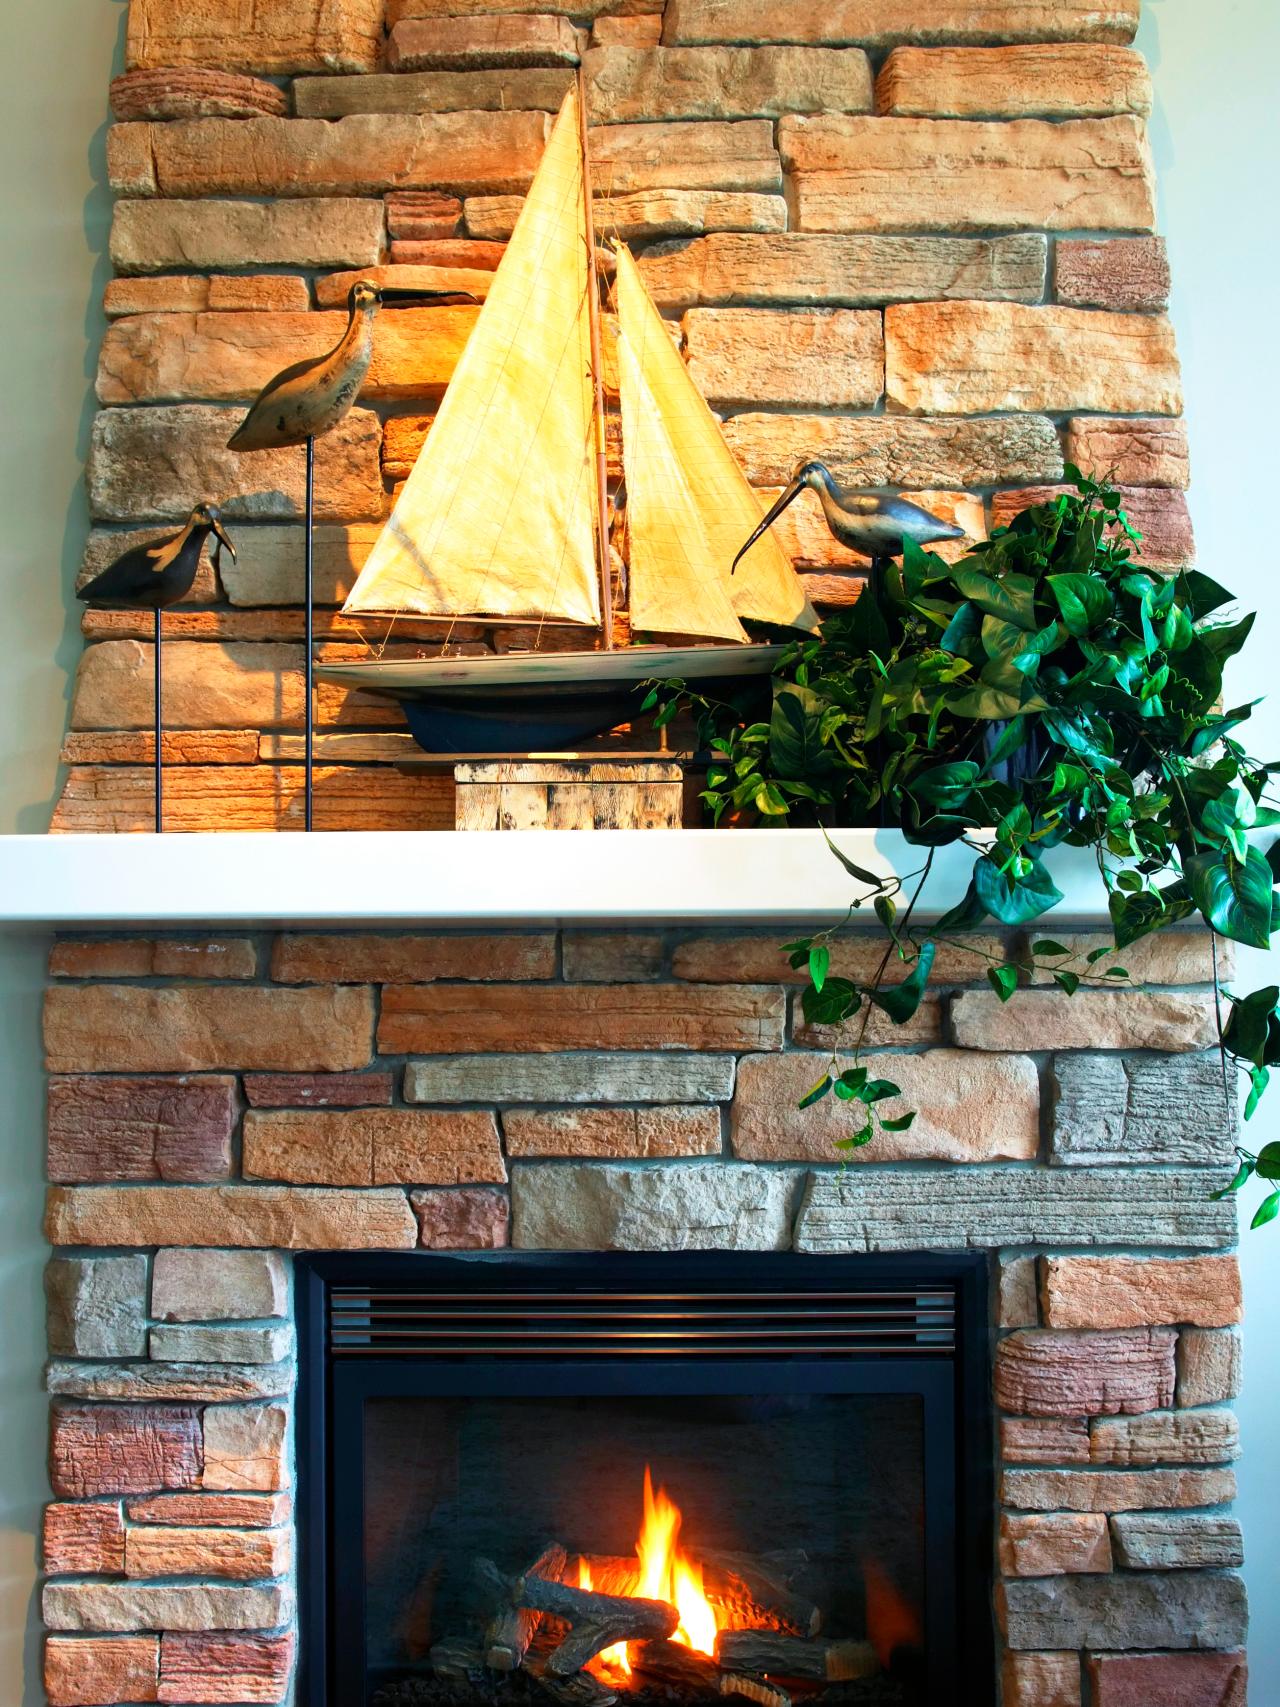 The Anatomy of a Fireplace